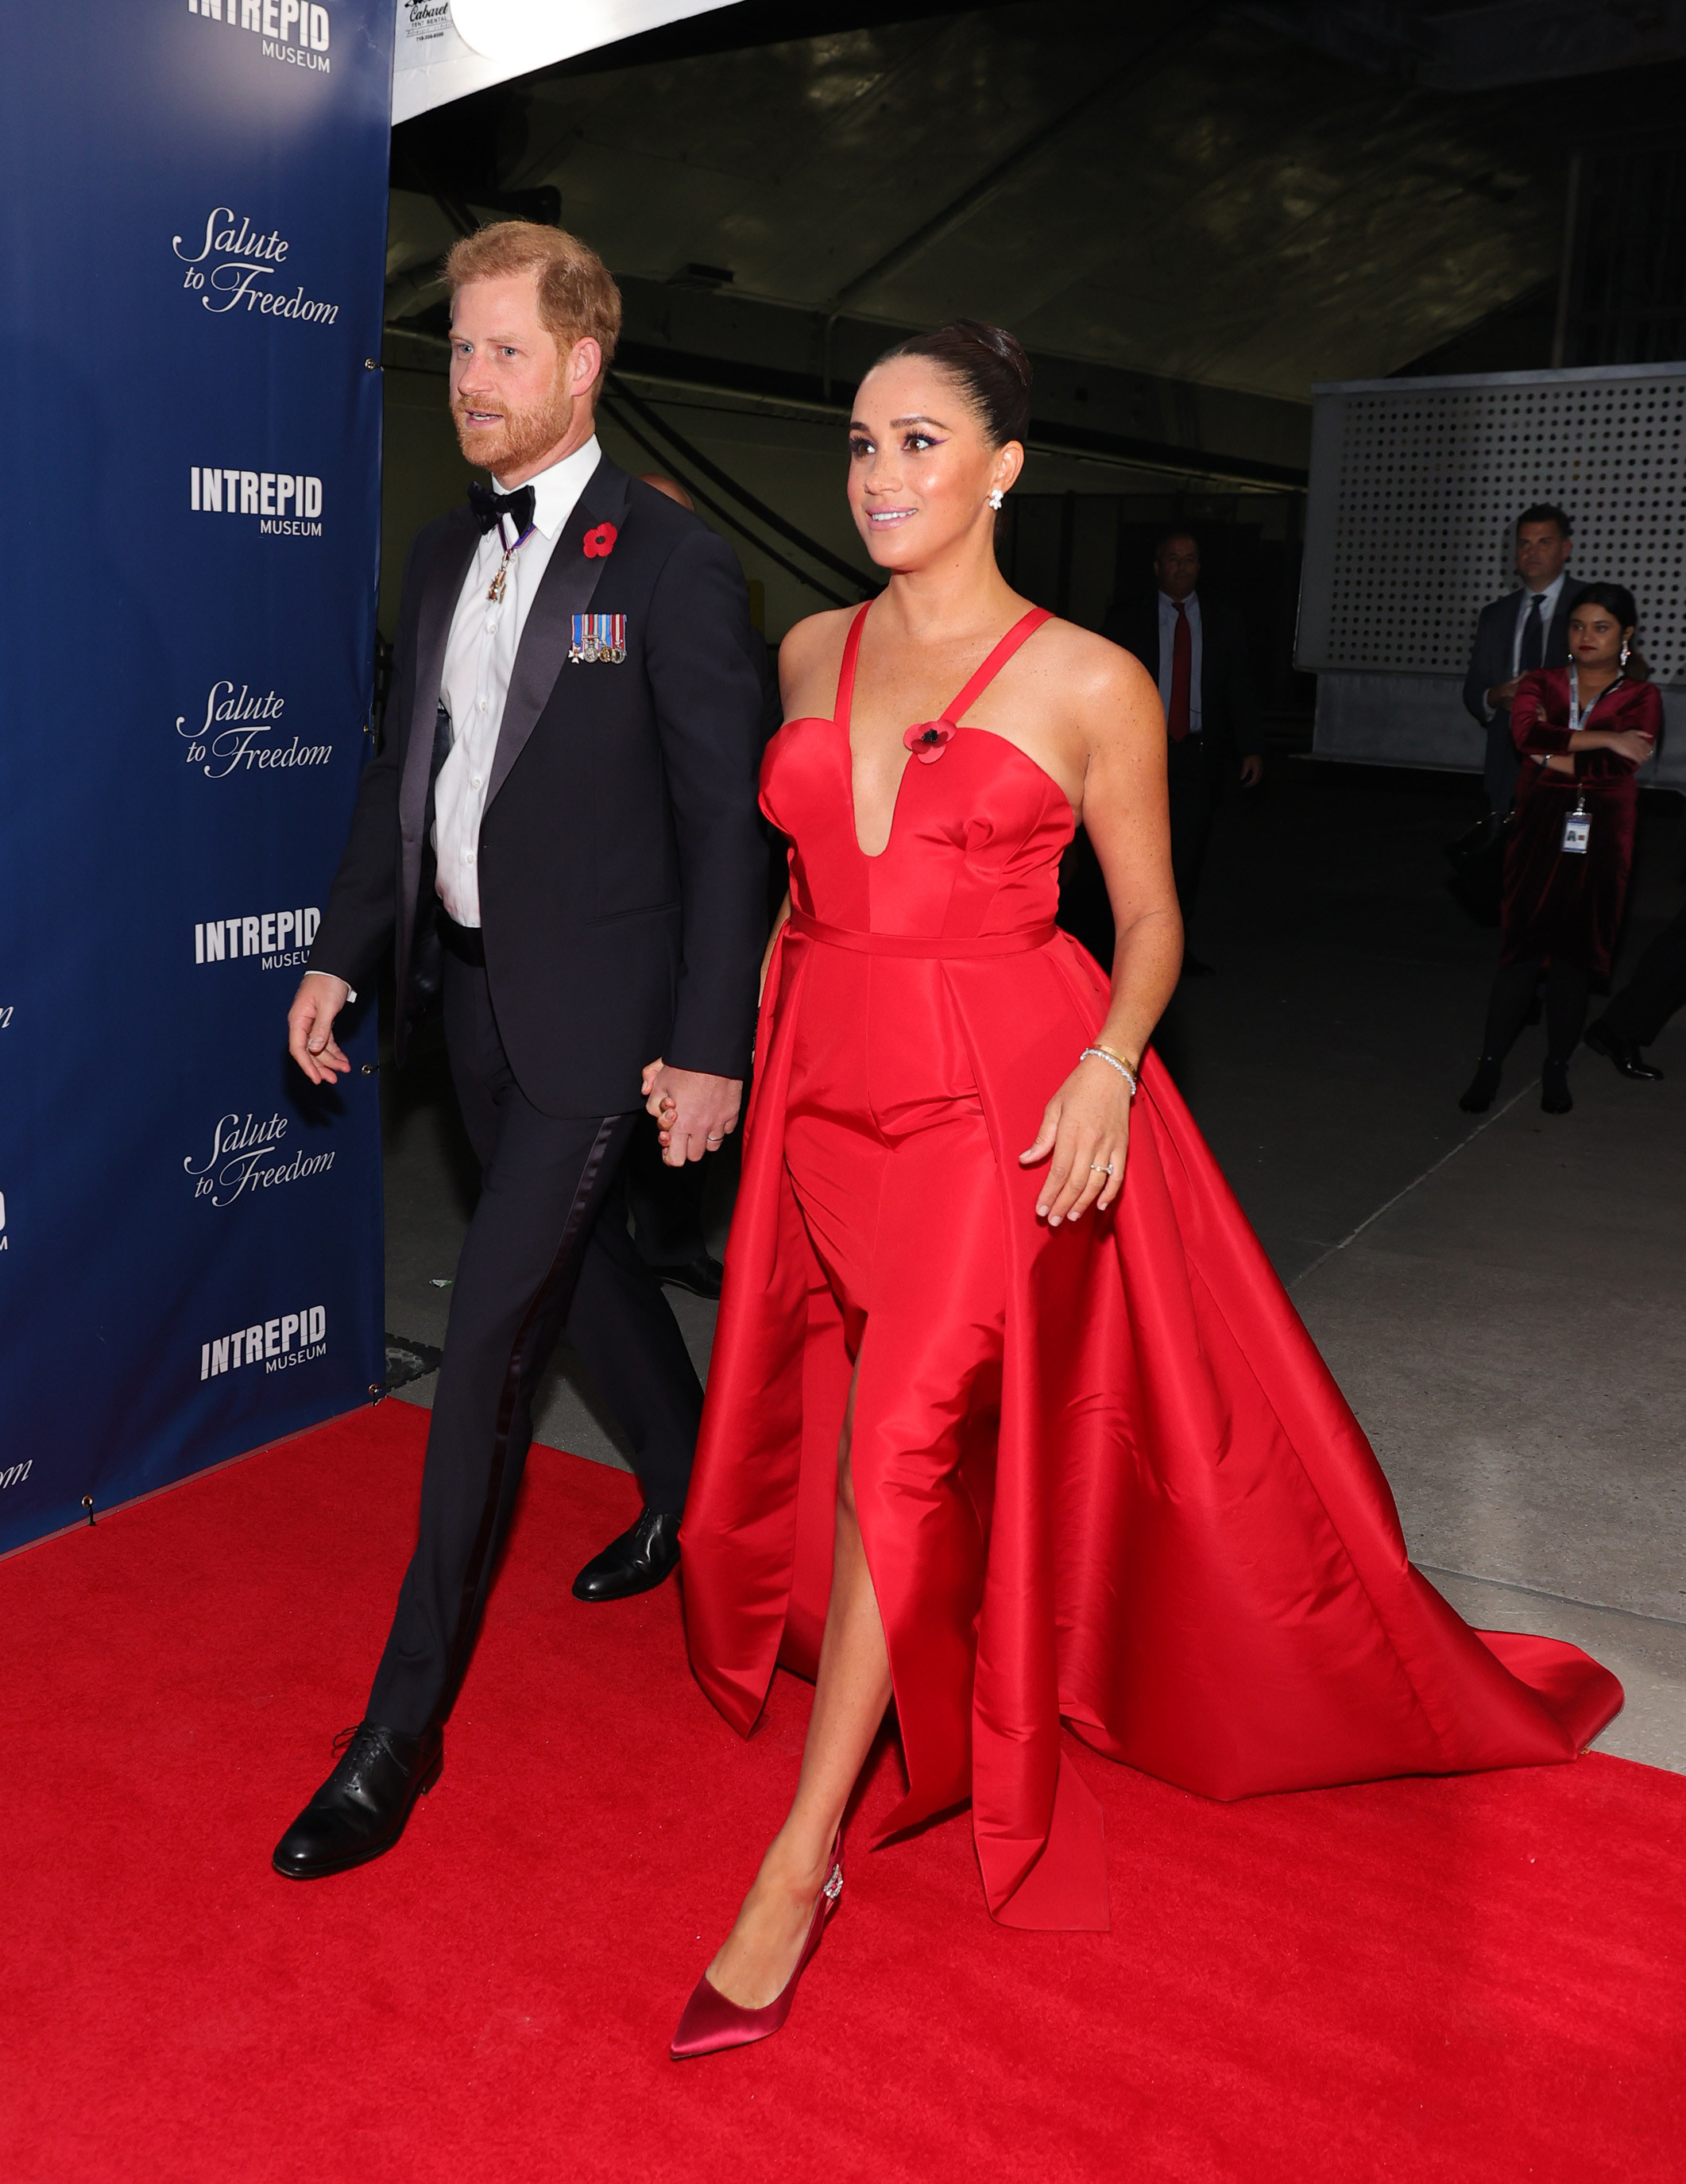 Harry and Meghan walk the red carpet